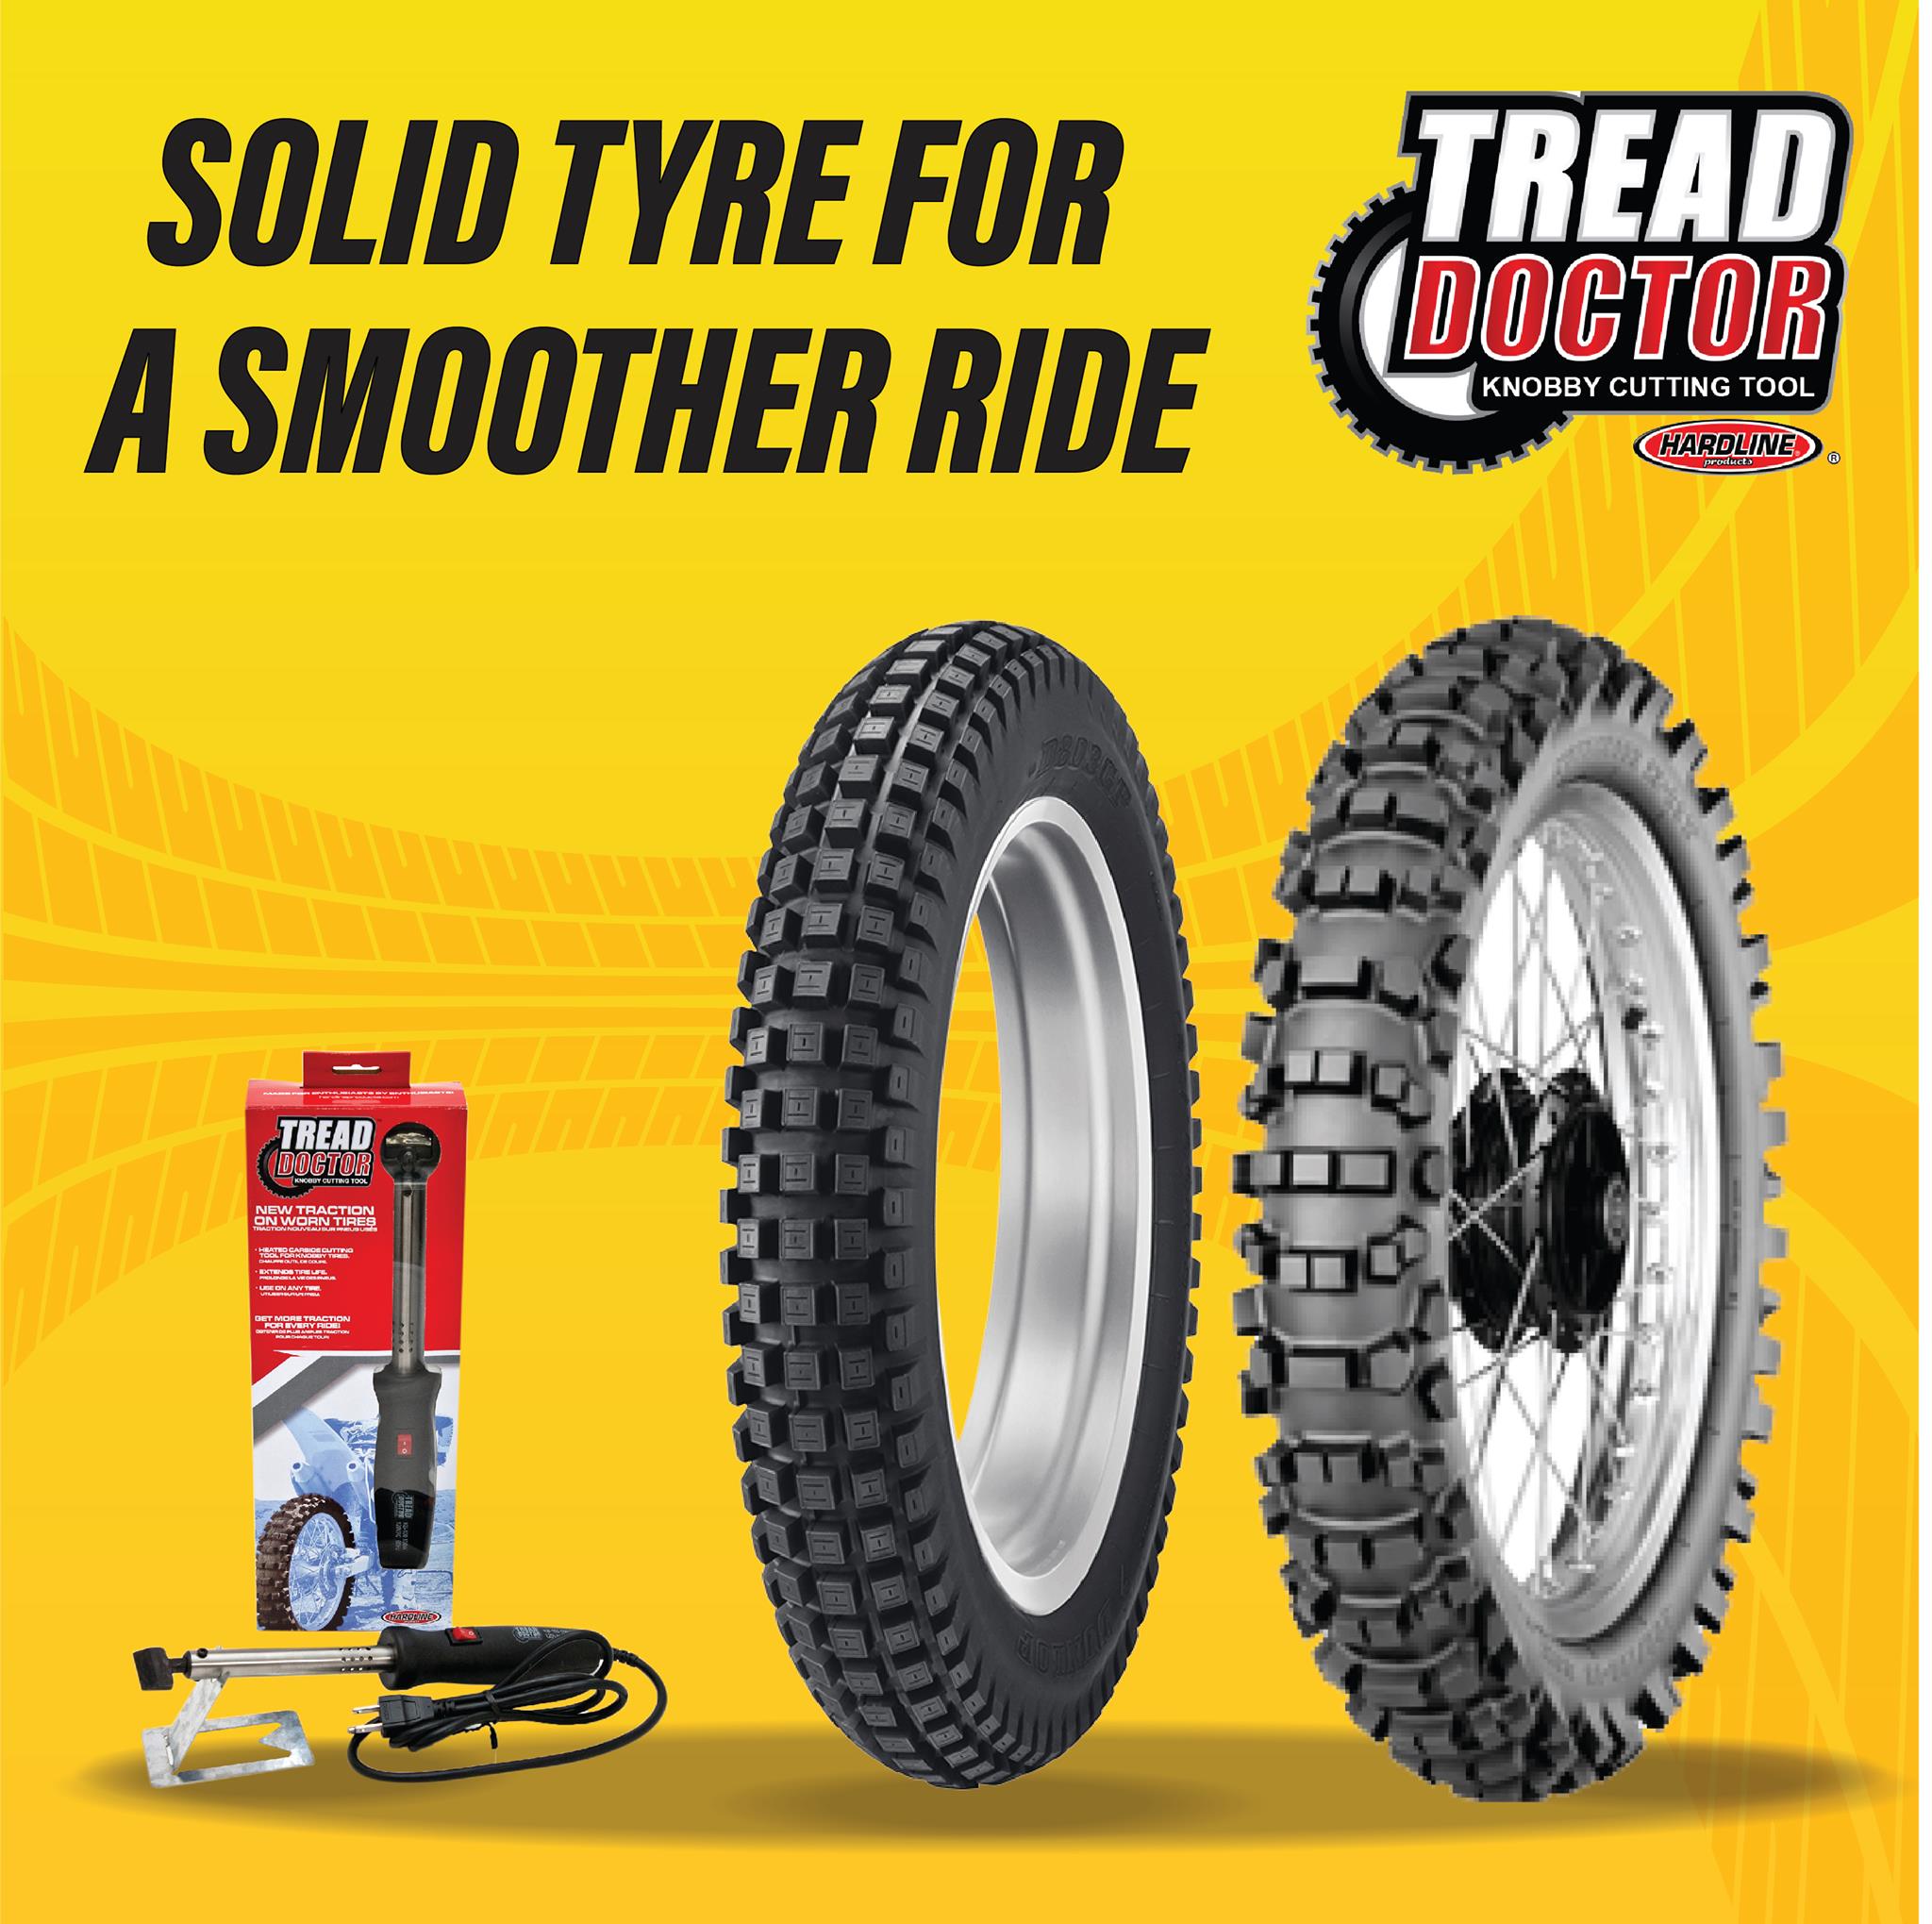 Keep the edges solid for hassle free smoother traveling with Tread Doctor.